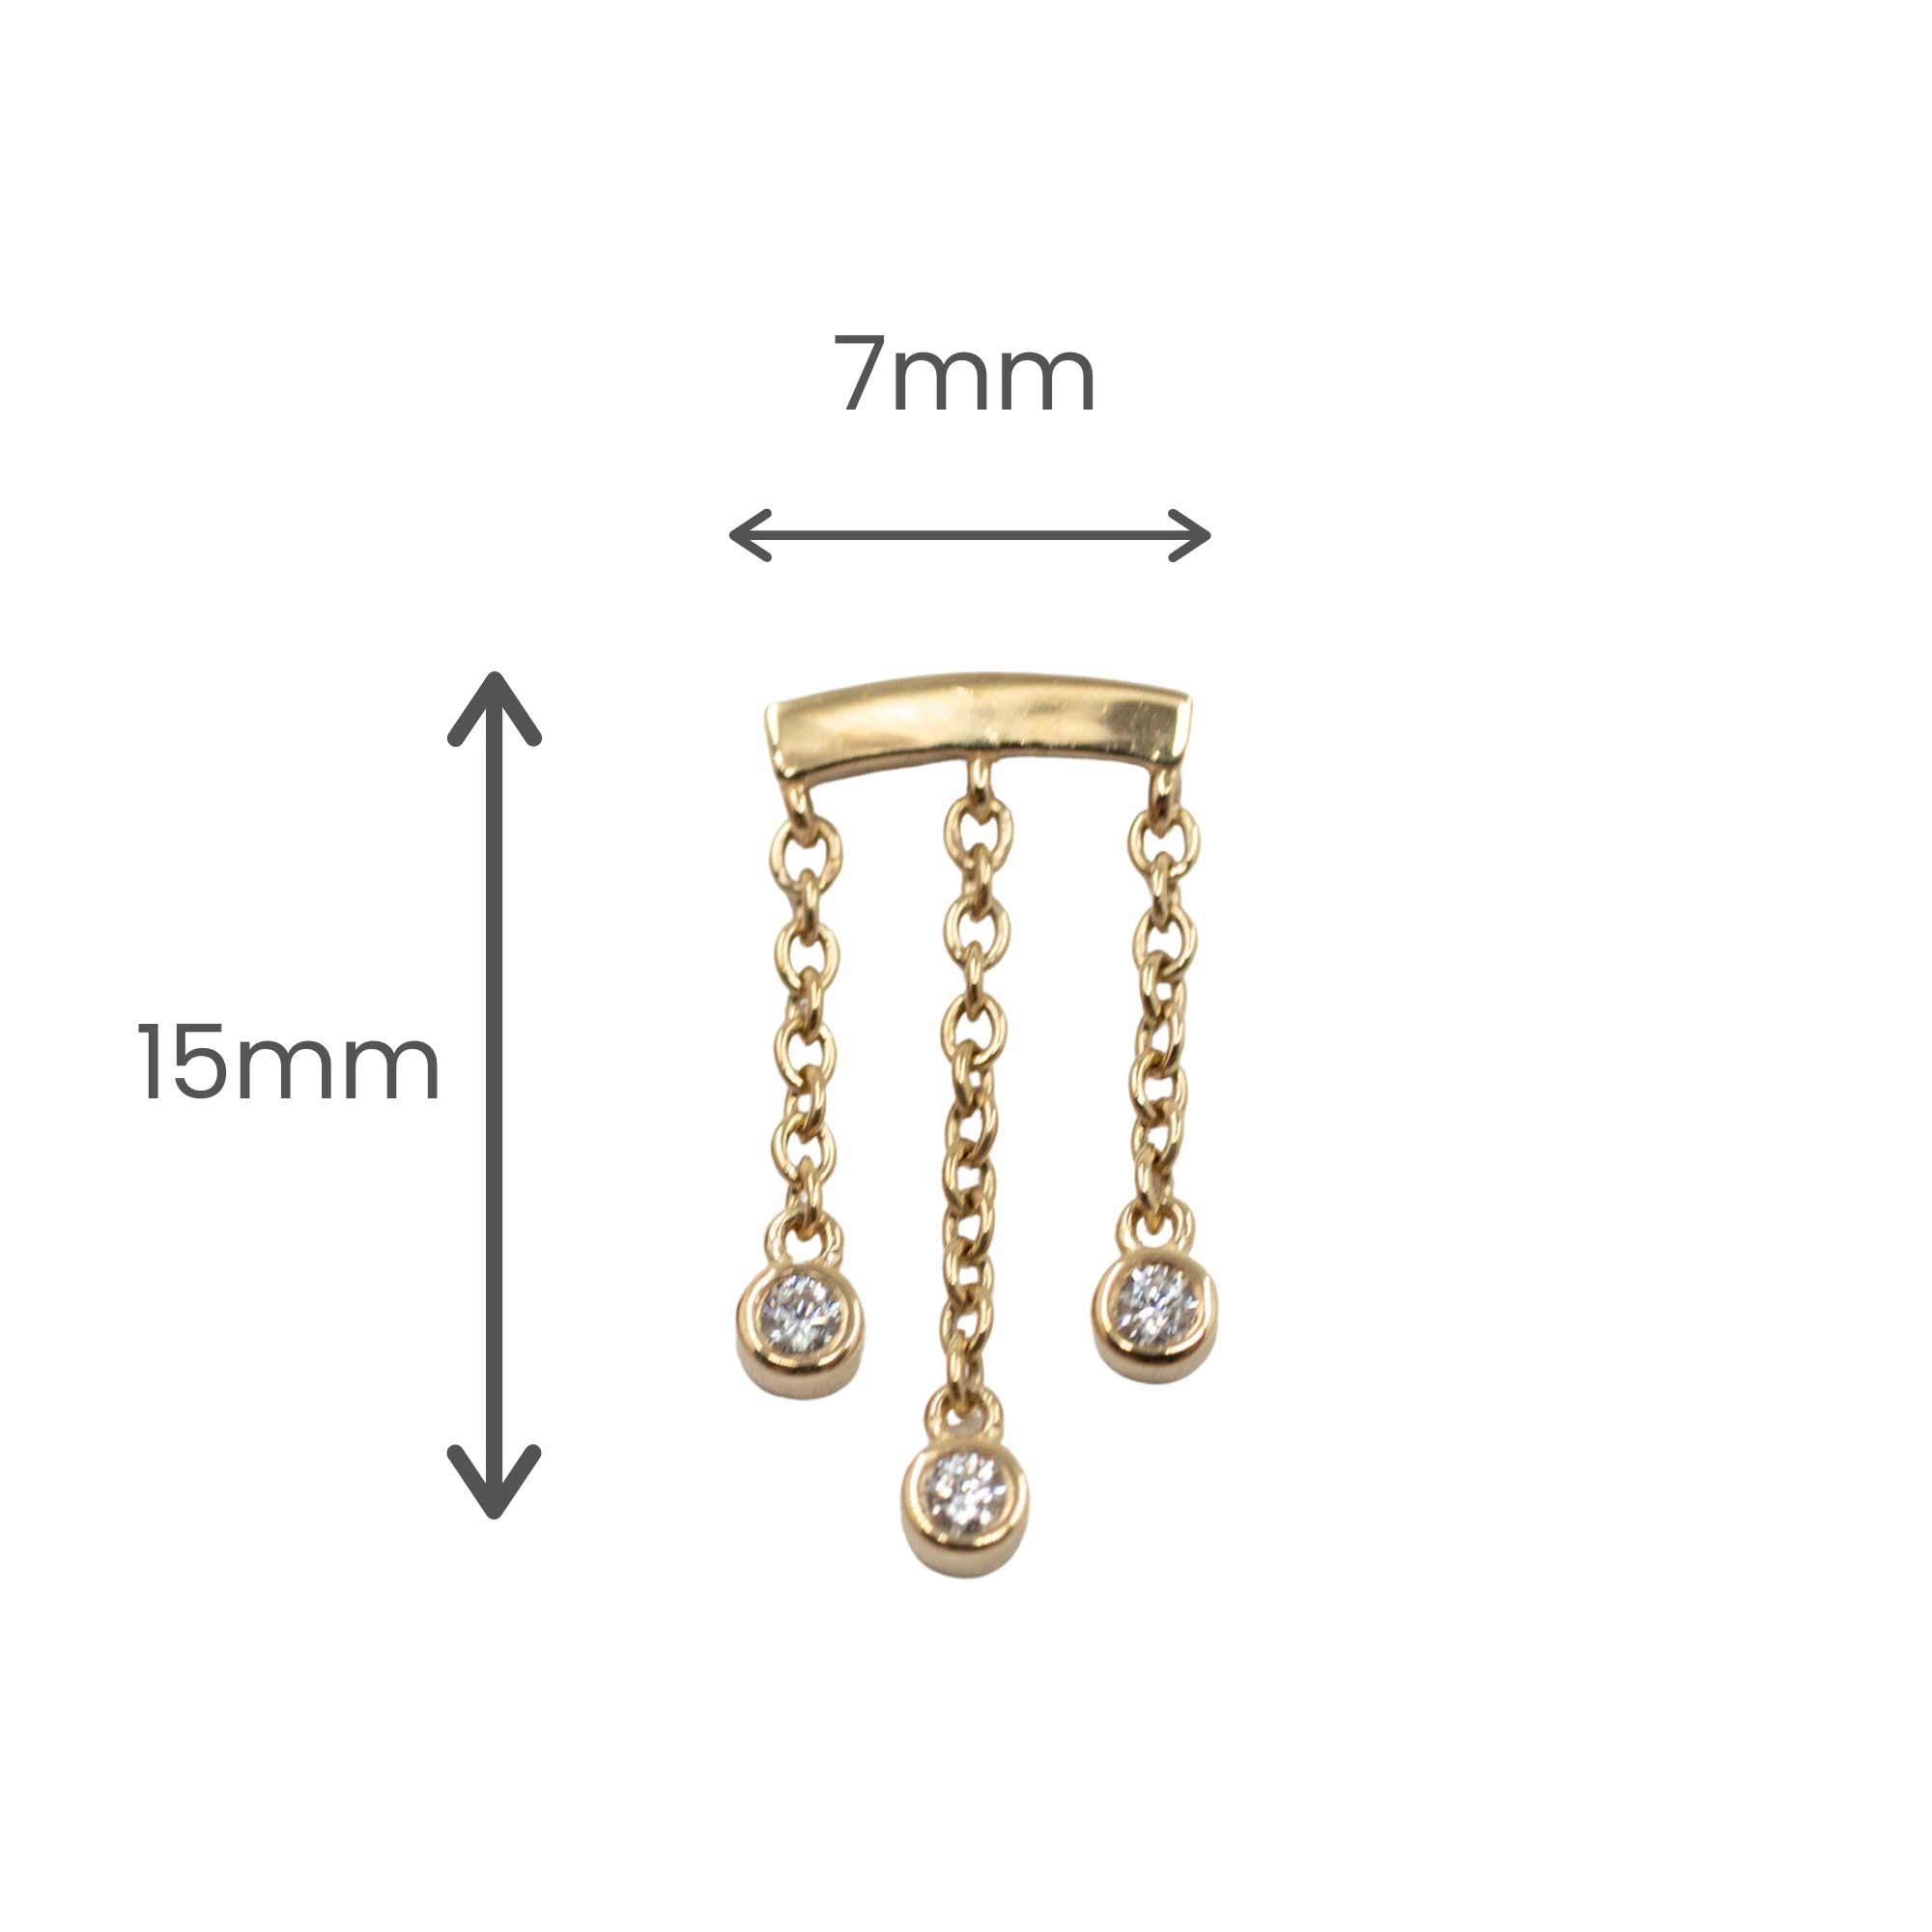 Asma Stainless Steel Stereoscopic 3 Star Screw Plug Gold Tone Stud Earrings  for Men : Amazon.in: Fashion